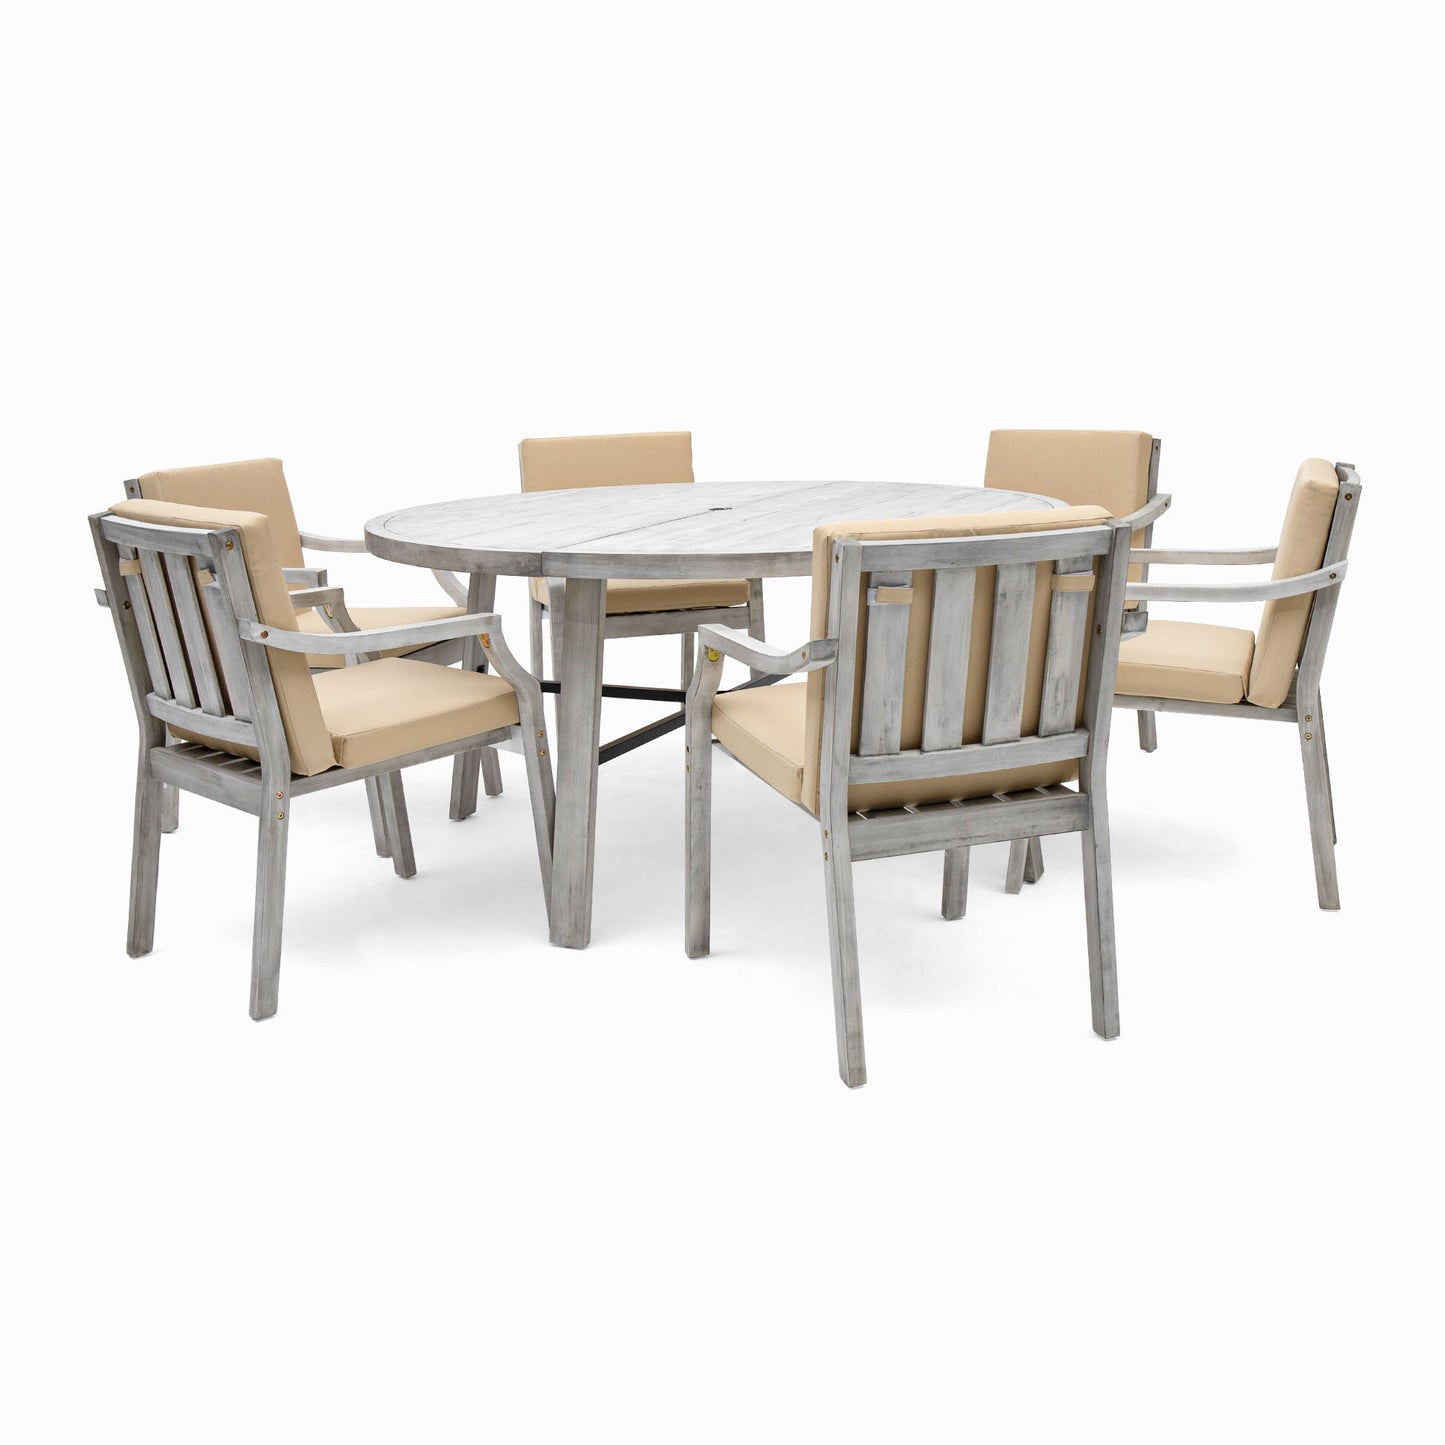 Outdoor Dinning Set 6-Person Outdoor, Umbrella Removable Cushions